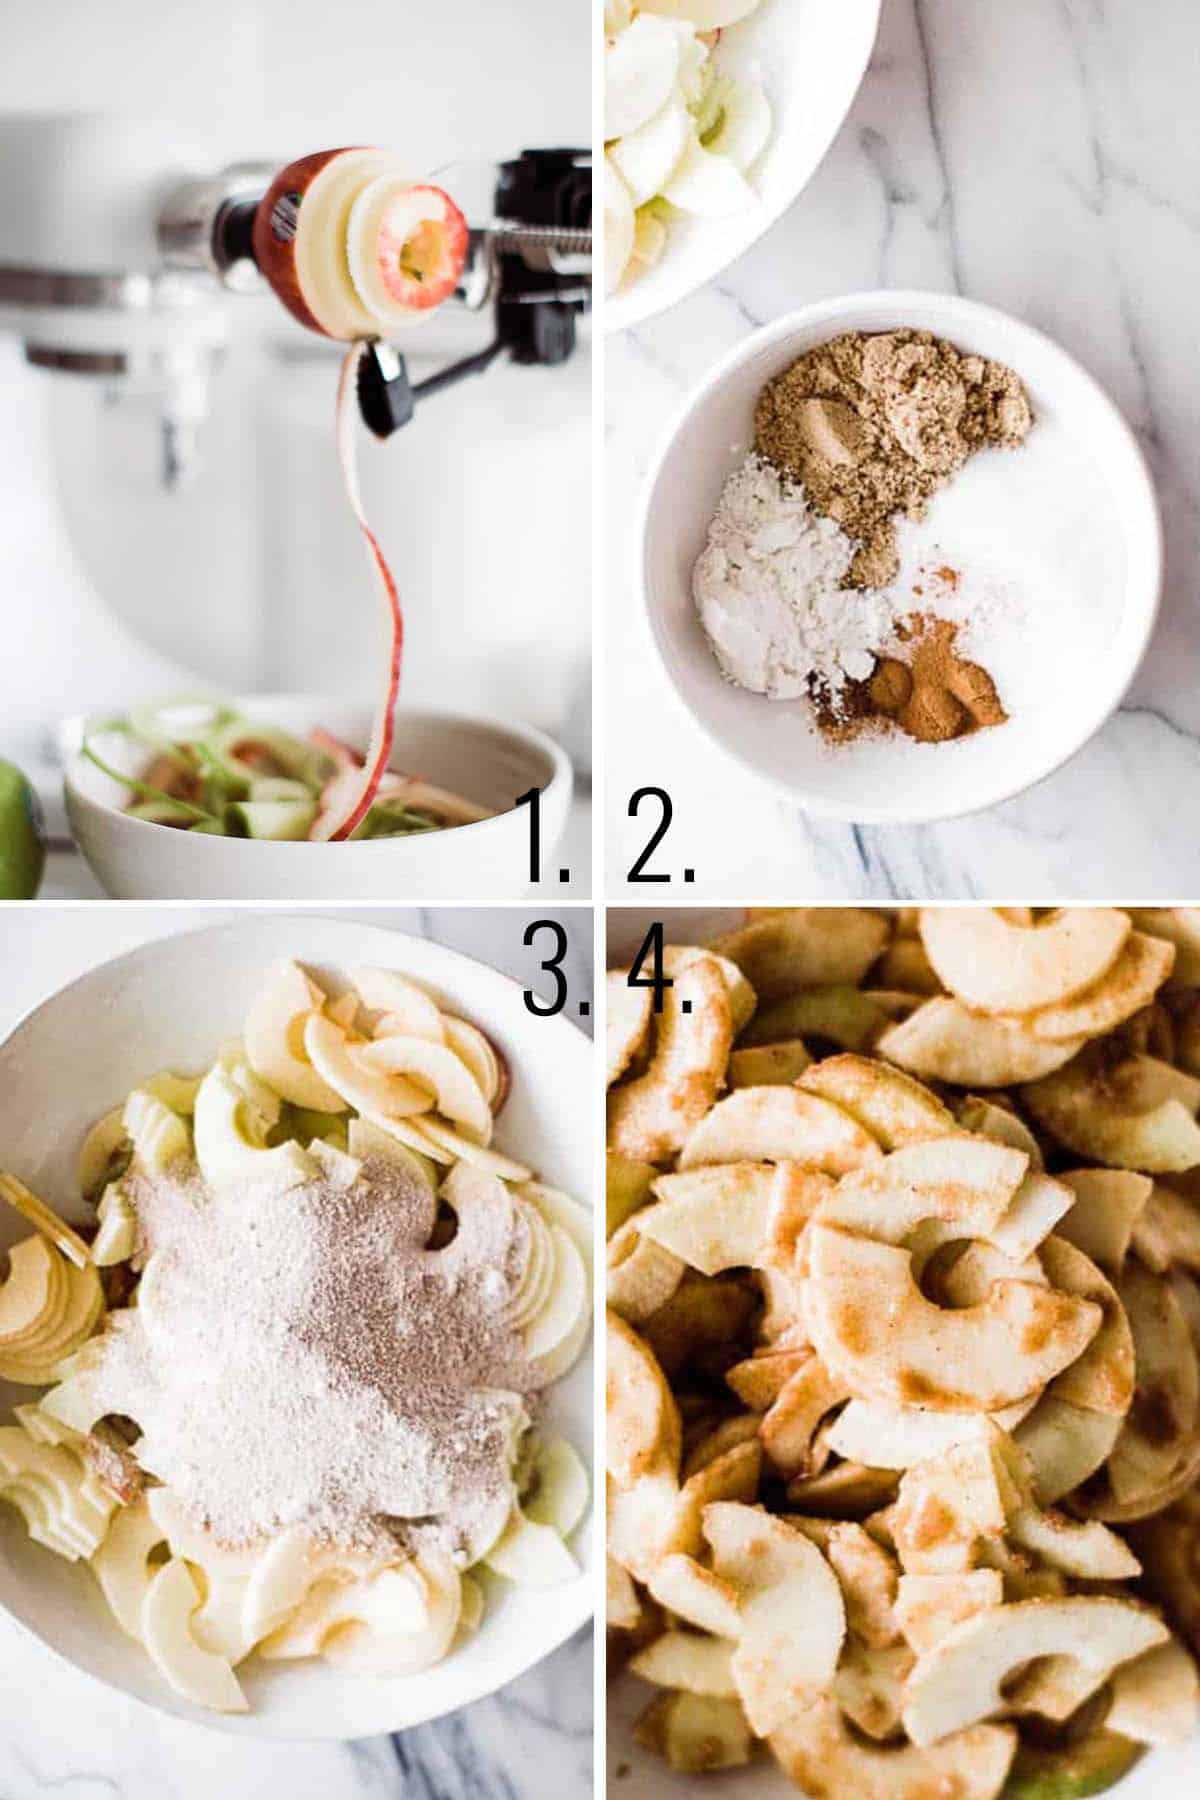 A collage of images showing prepping the apple pie filling for the pie.